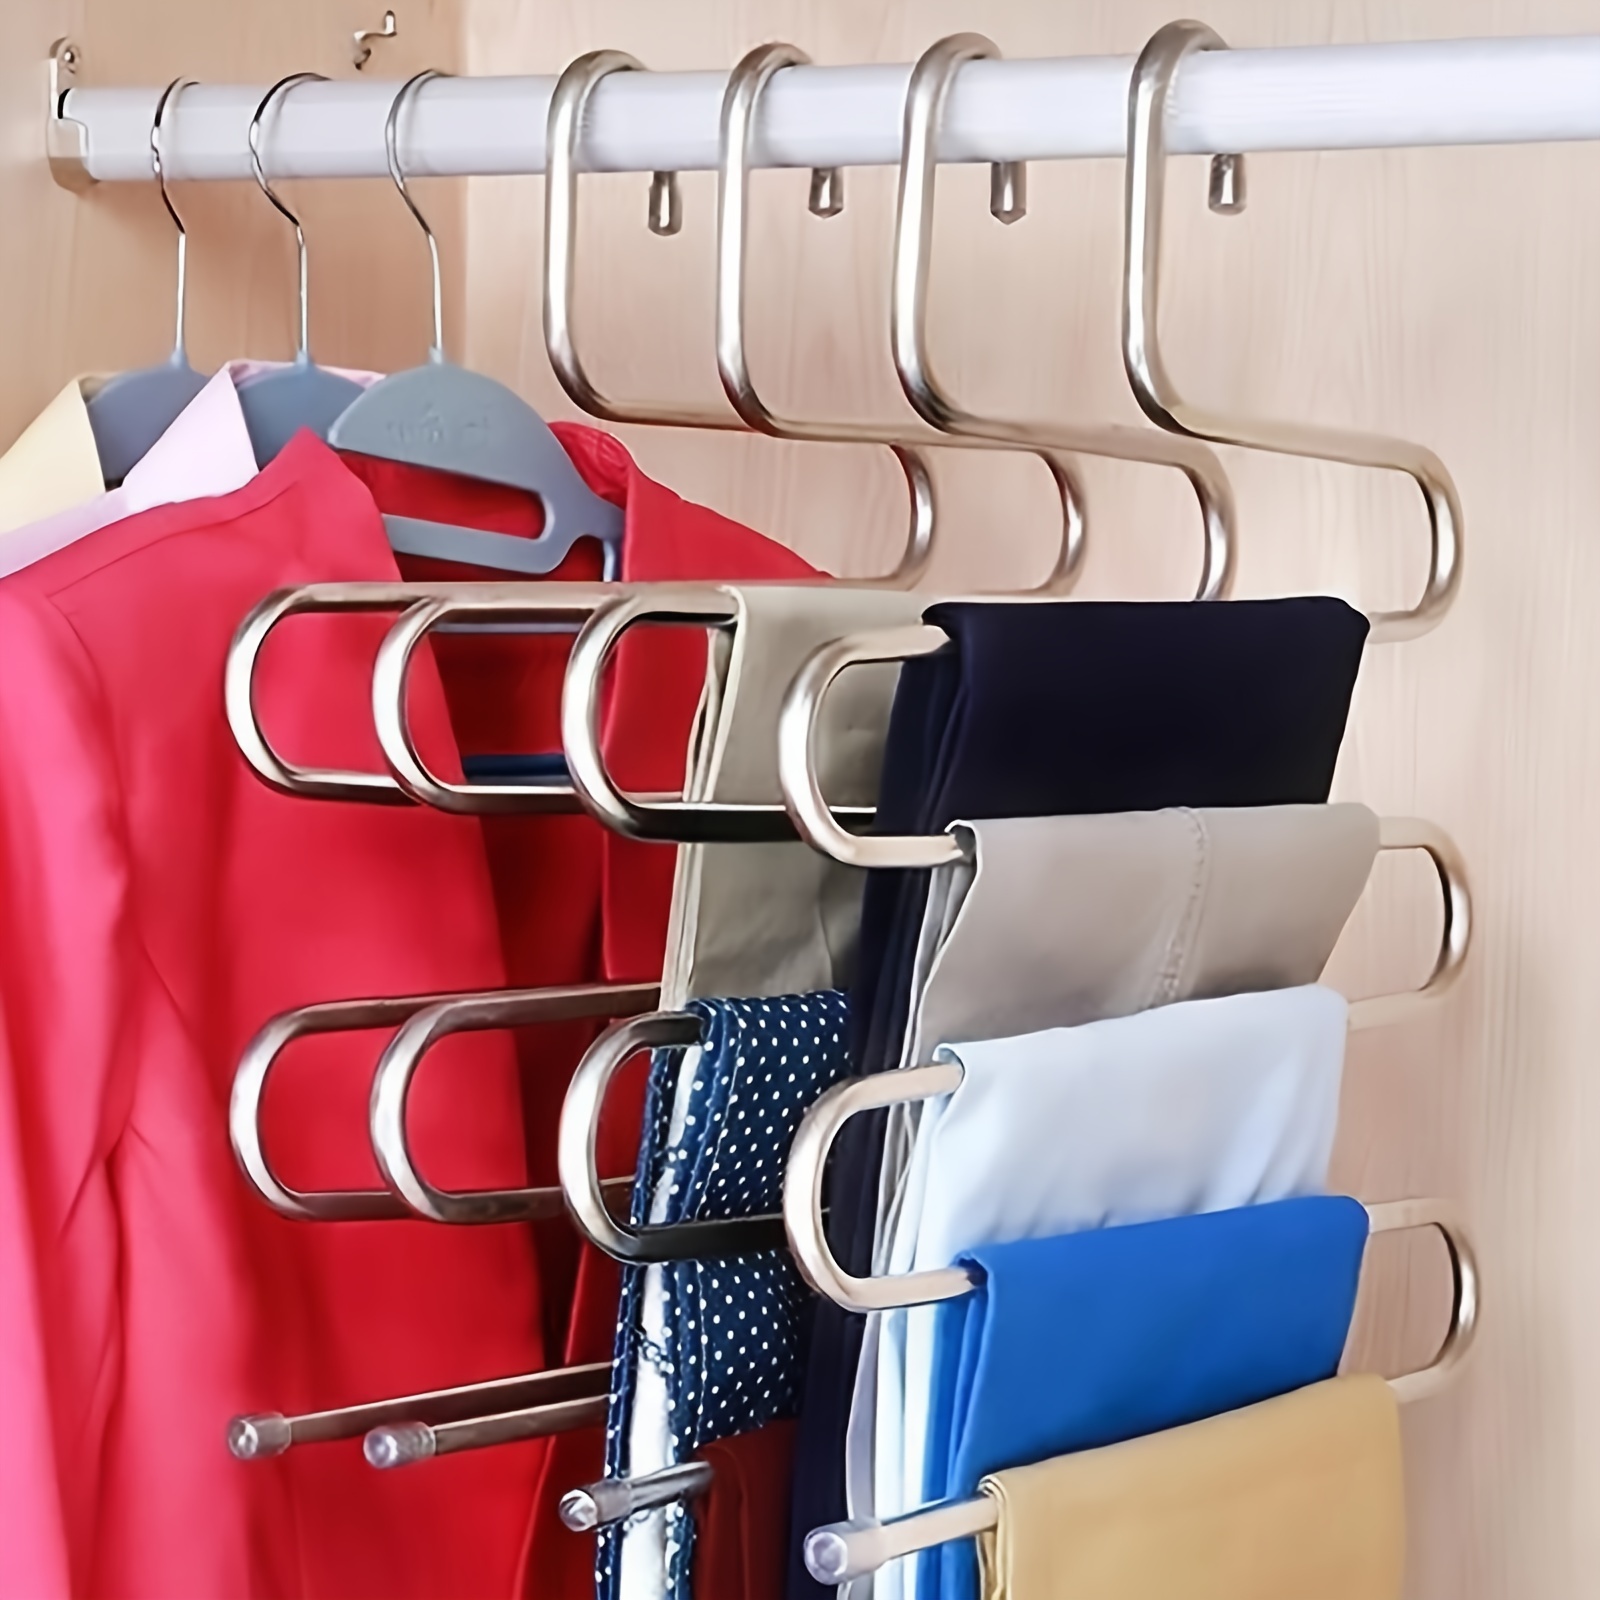 

1pc 5-layer Pants Hanger, Non Slip Legging Drying Rack, Save Space Storage And Organization For Wardrobe, Closet, Bedroom, Suitable For Pants, Jeans, Scarves